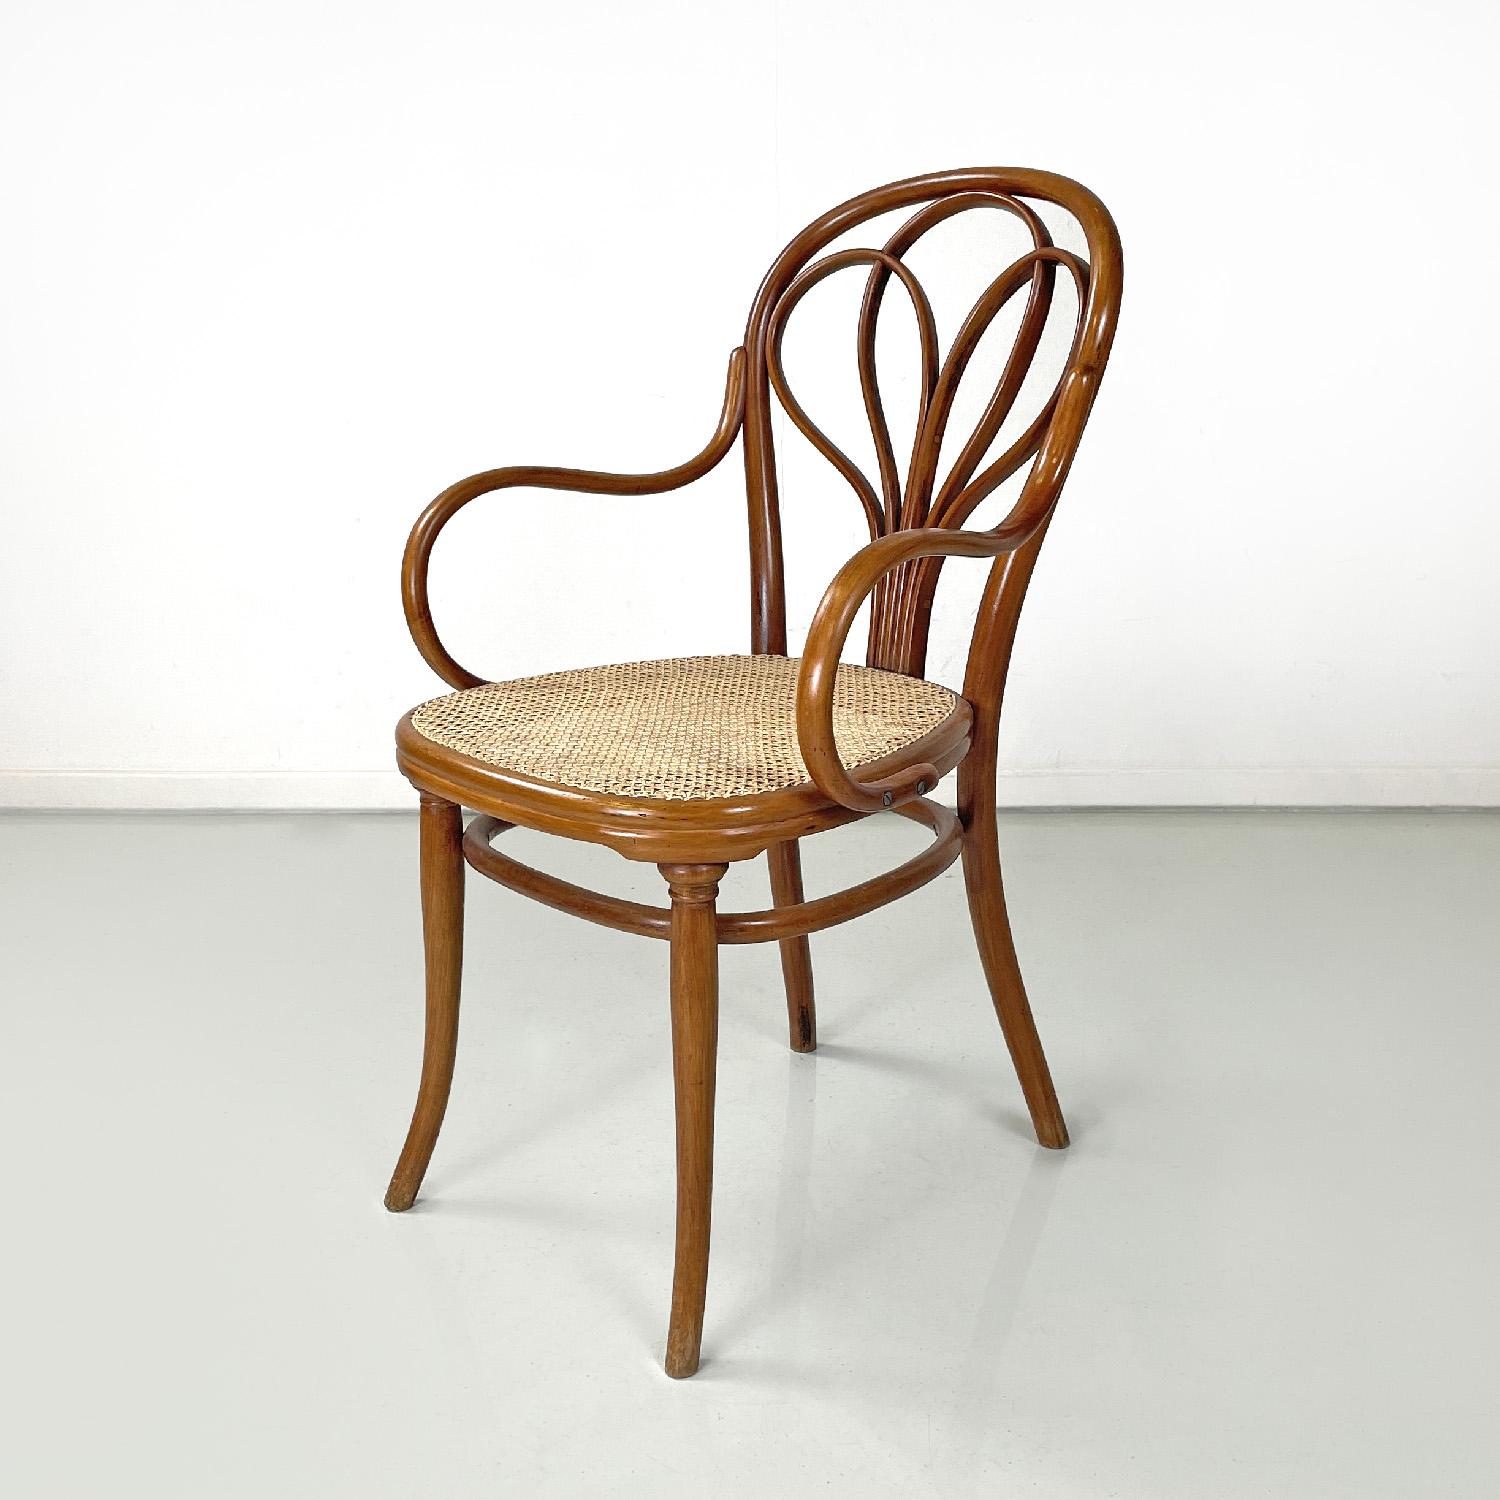 Austrian antique wooden Thonet armchair with Vienna straw, early 1900s
Chair with rounded seat in Vienna straw. The structure is entirely made of wood with a round section. The backrest has a rounded interlocking decoration that reaches up to the